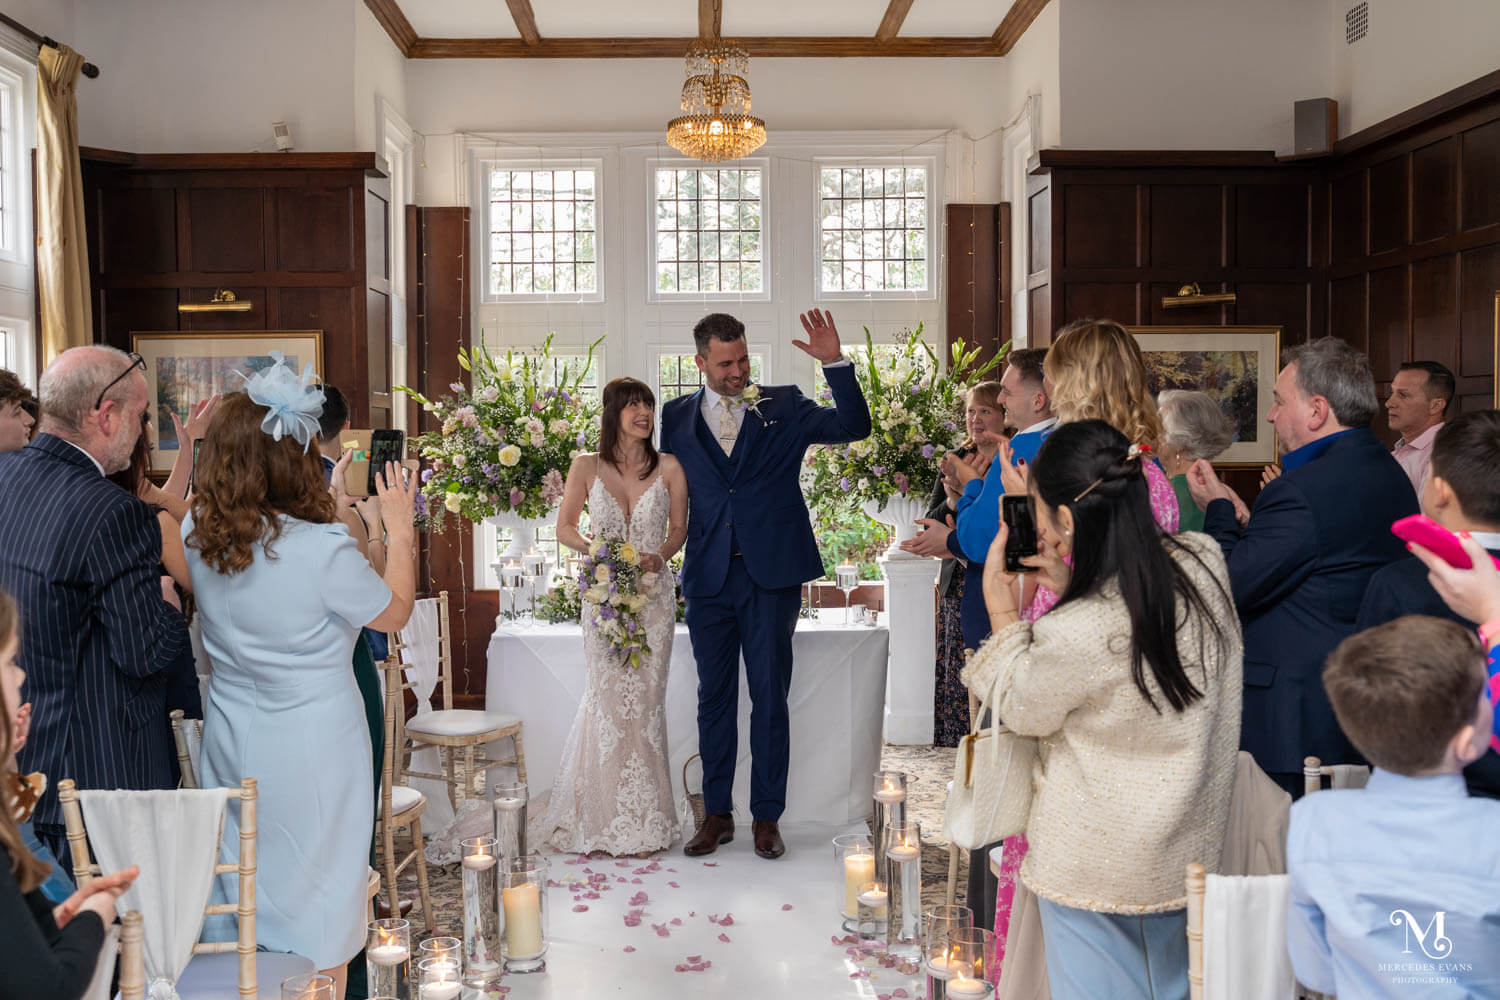 the bride and groom smile at guests and wave as they leave the ceremony in the Oak room at Cantley House Hotel